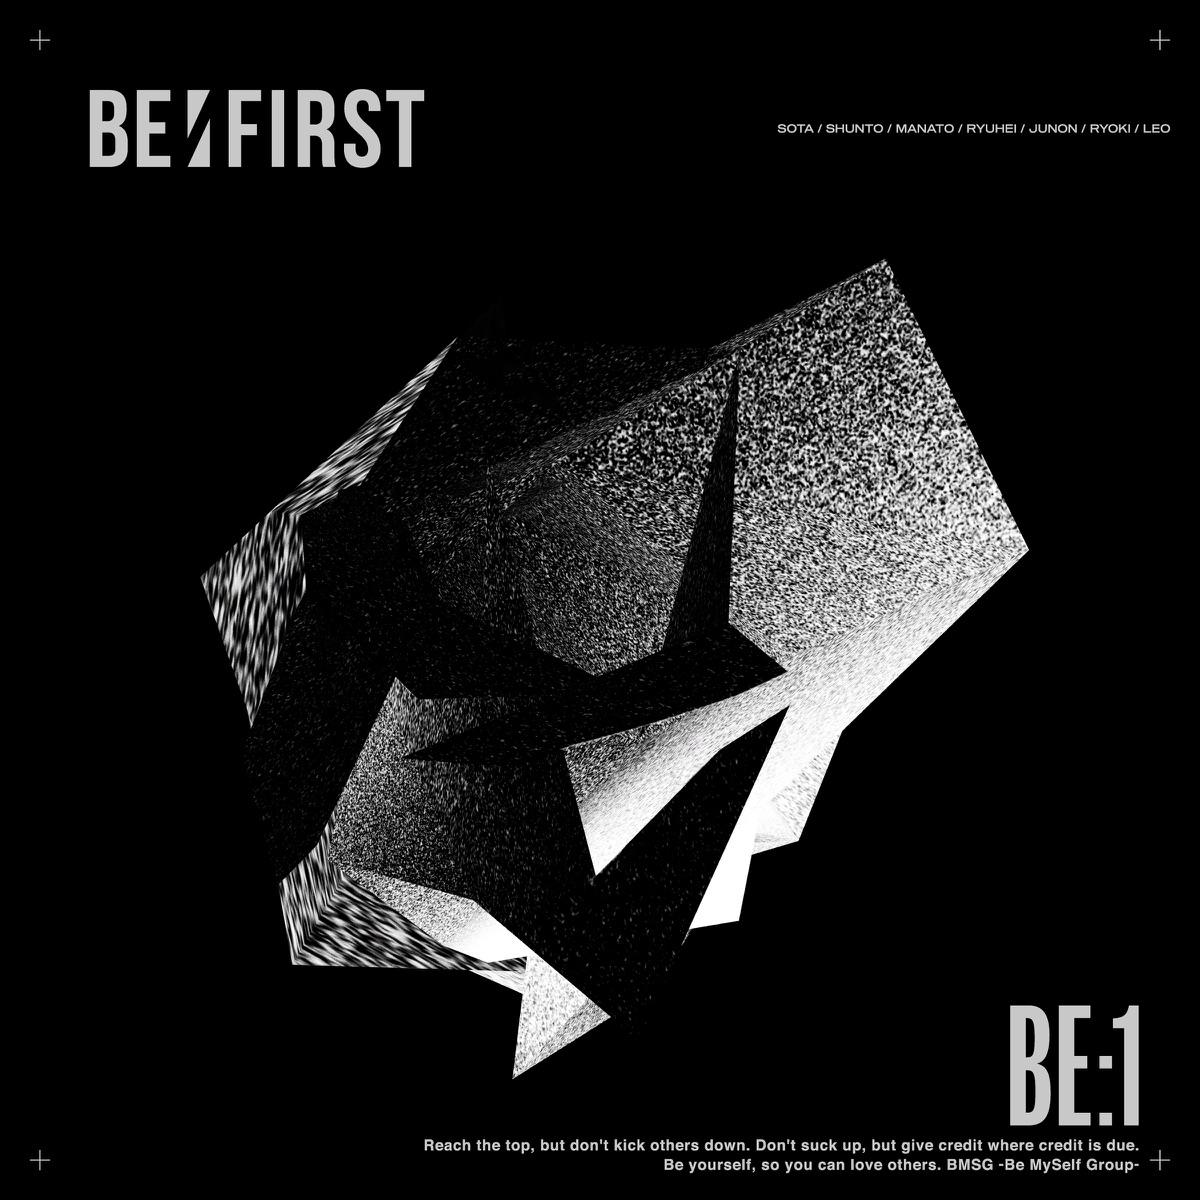 『BE:FIRST - Moment』収録の『BE:1』ジャケット